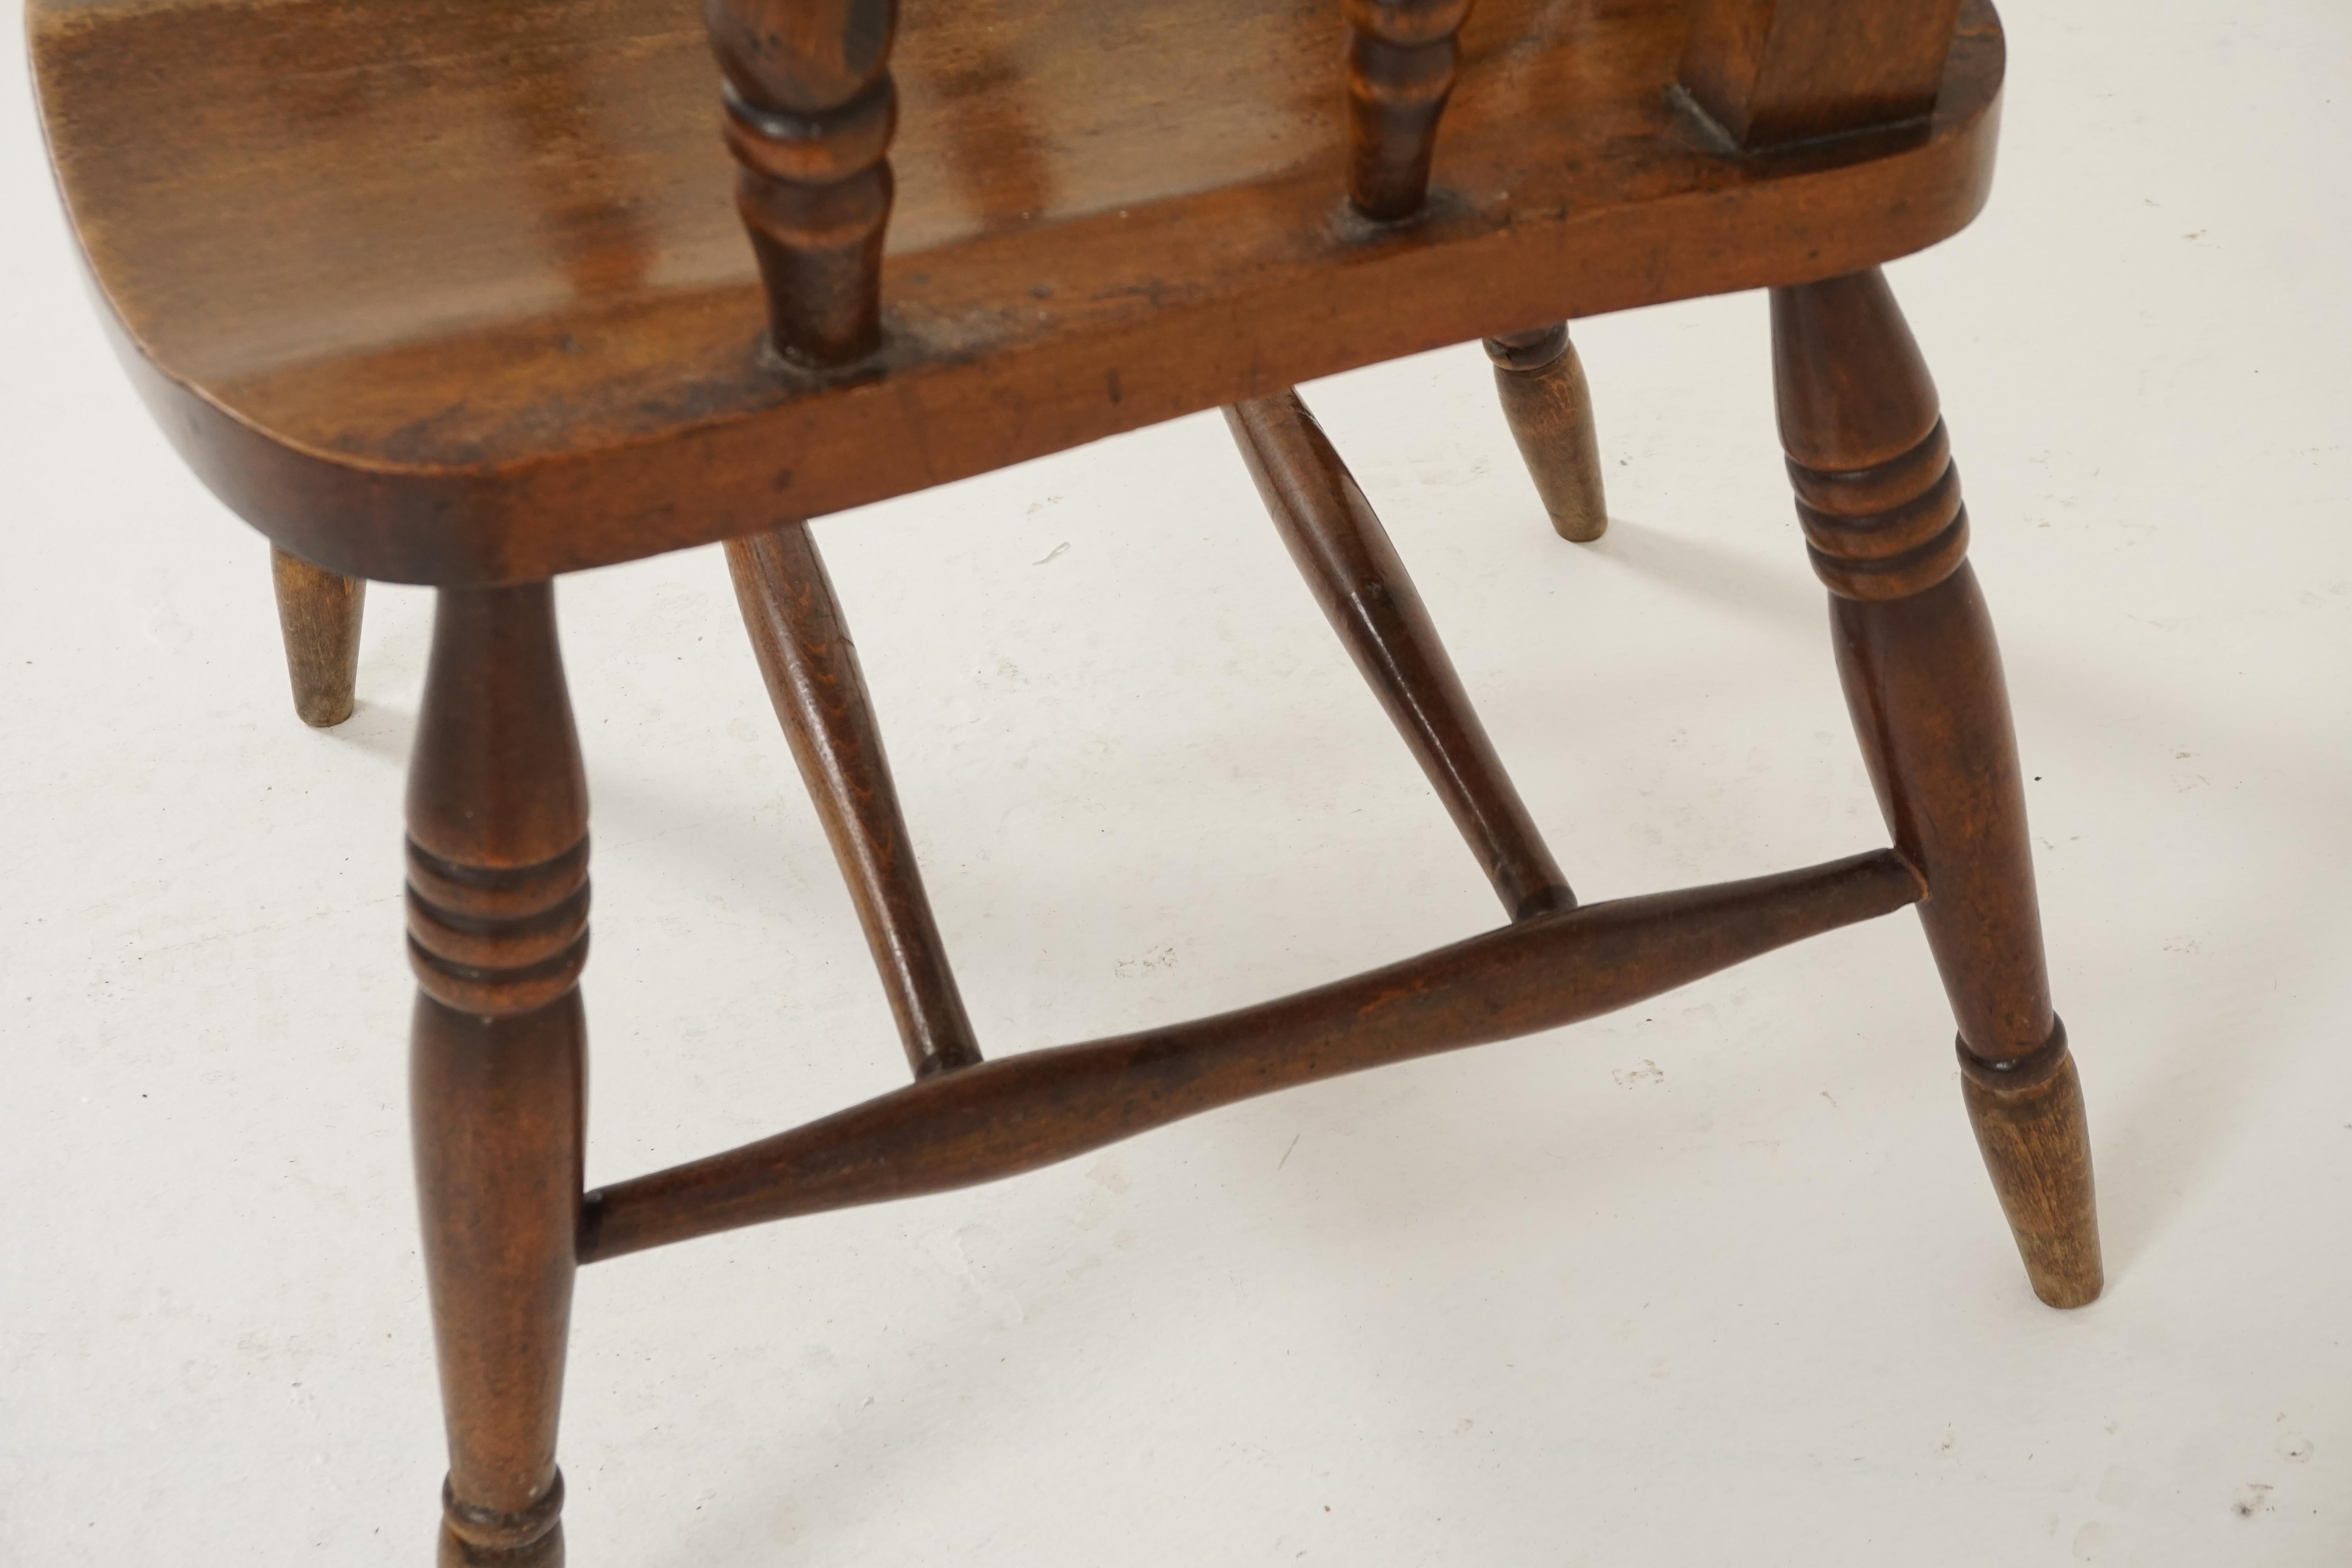 Late 19th Century Antique Arm Chair, Windsor High Back, Country Beech Chair, Scotland 1880, B2366